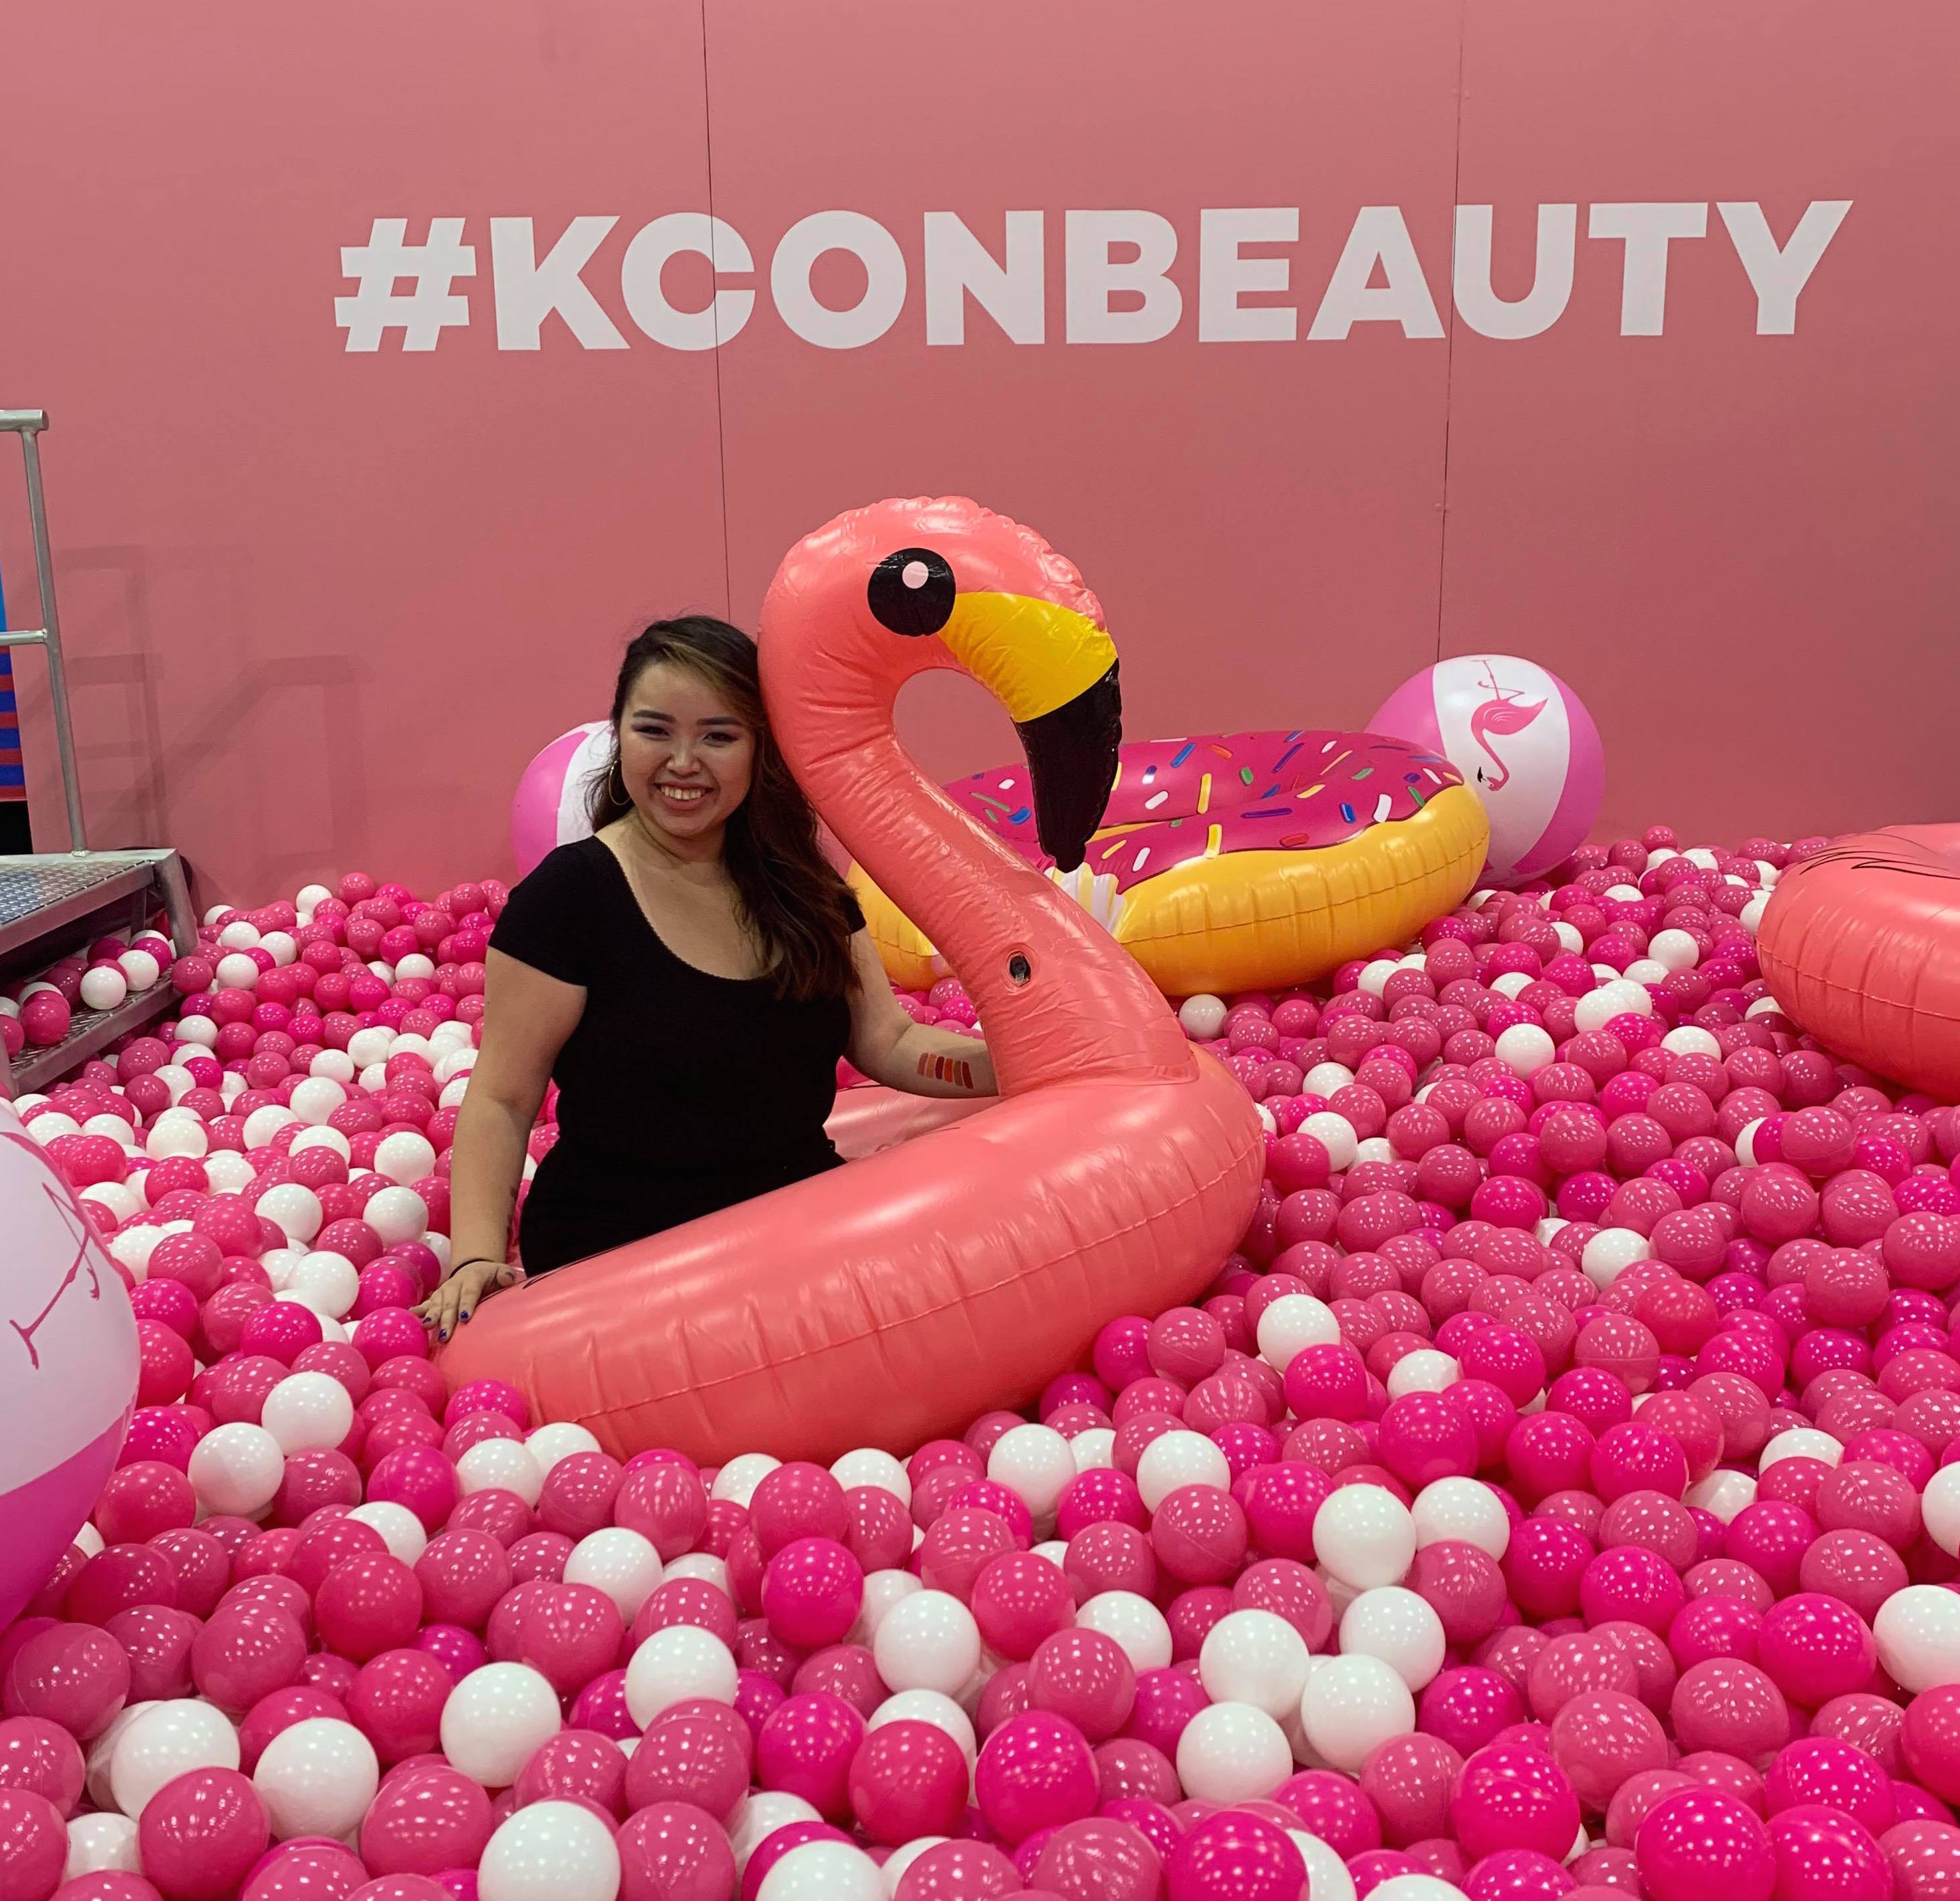 Photo from when I worked a beauty even at KCon LA